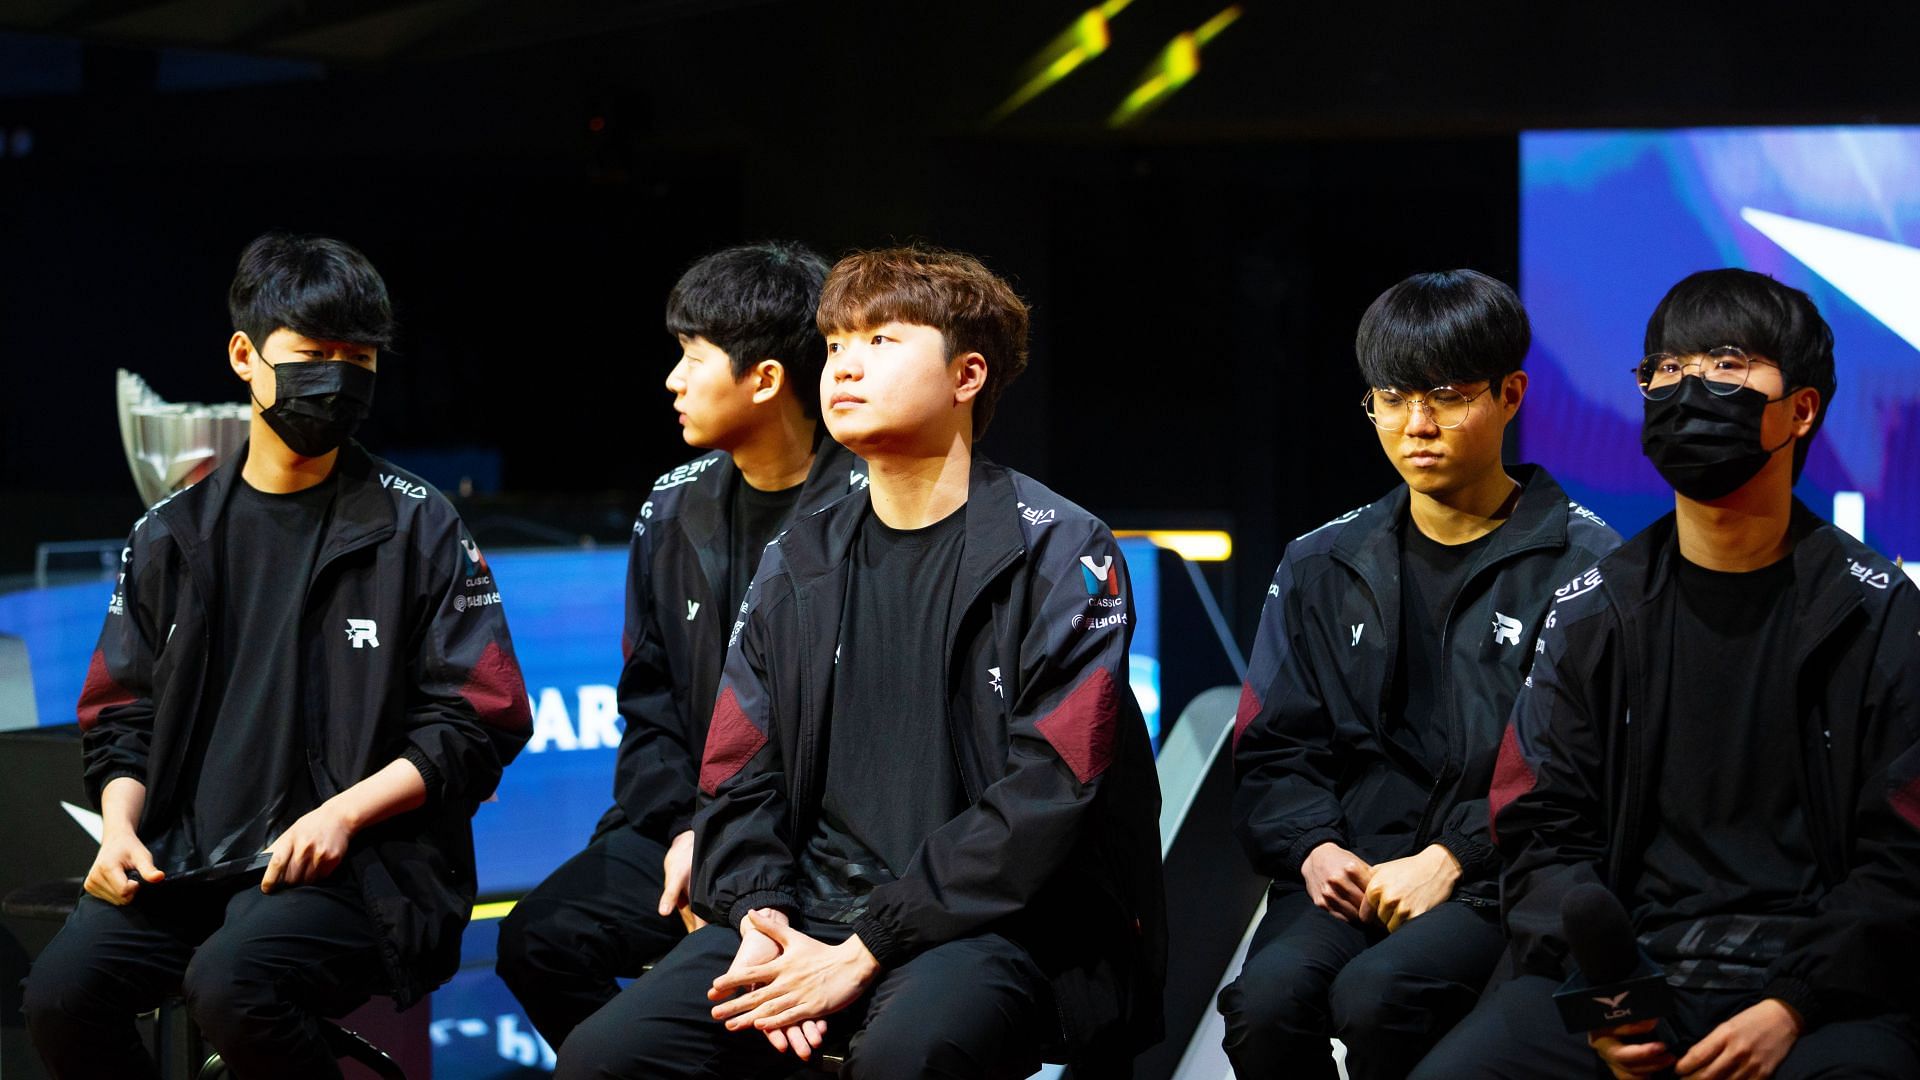 KT Rolster is hoping for another underdog run and win the LCK (Image via Daily eSports)